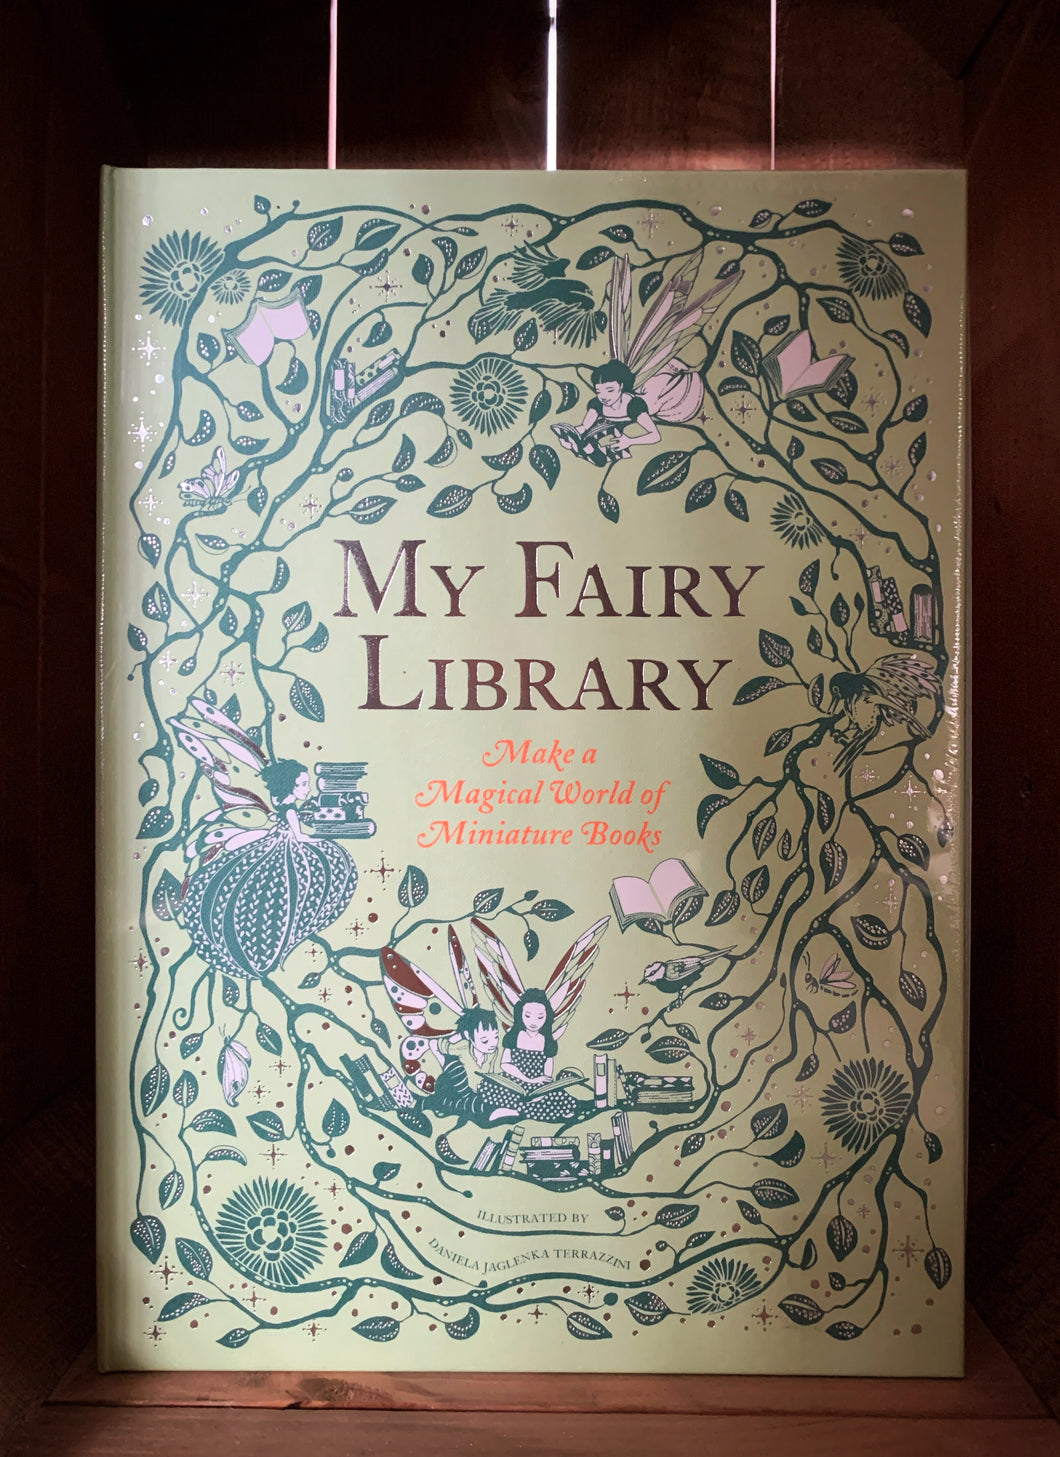 Image of the front of the box for My Fairy Library. The front has a pale green background, with the name in the center in foiled gold lettering. Surrounding the title are illustrations of leaved vines and flowers in dark green, with fairies and books scattered throughout in dark green and white. 